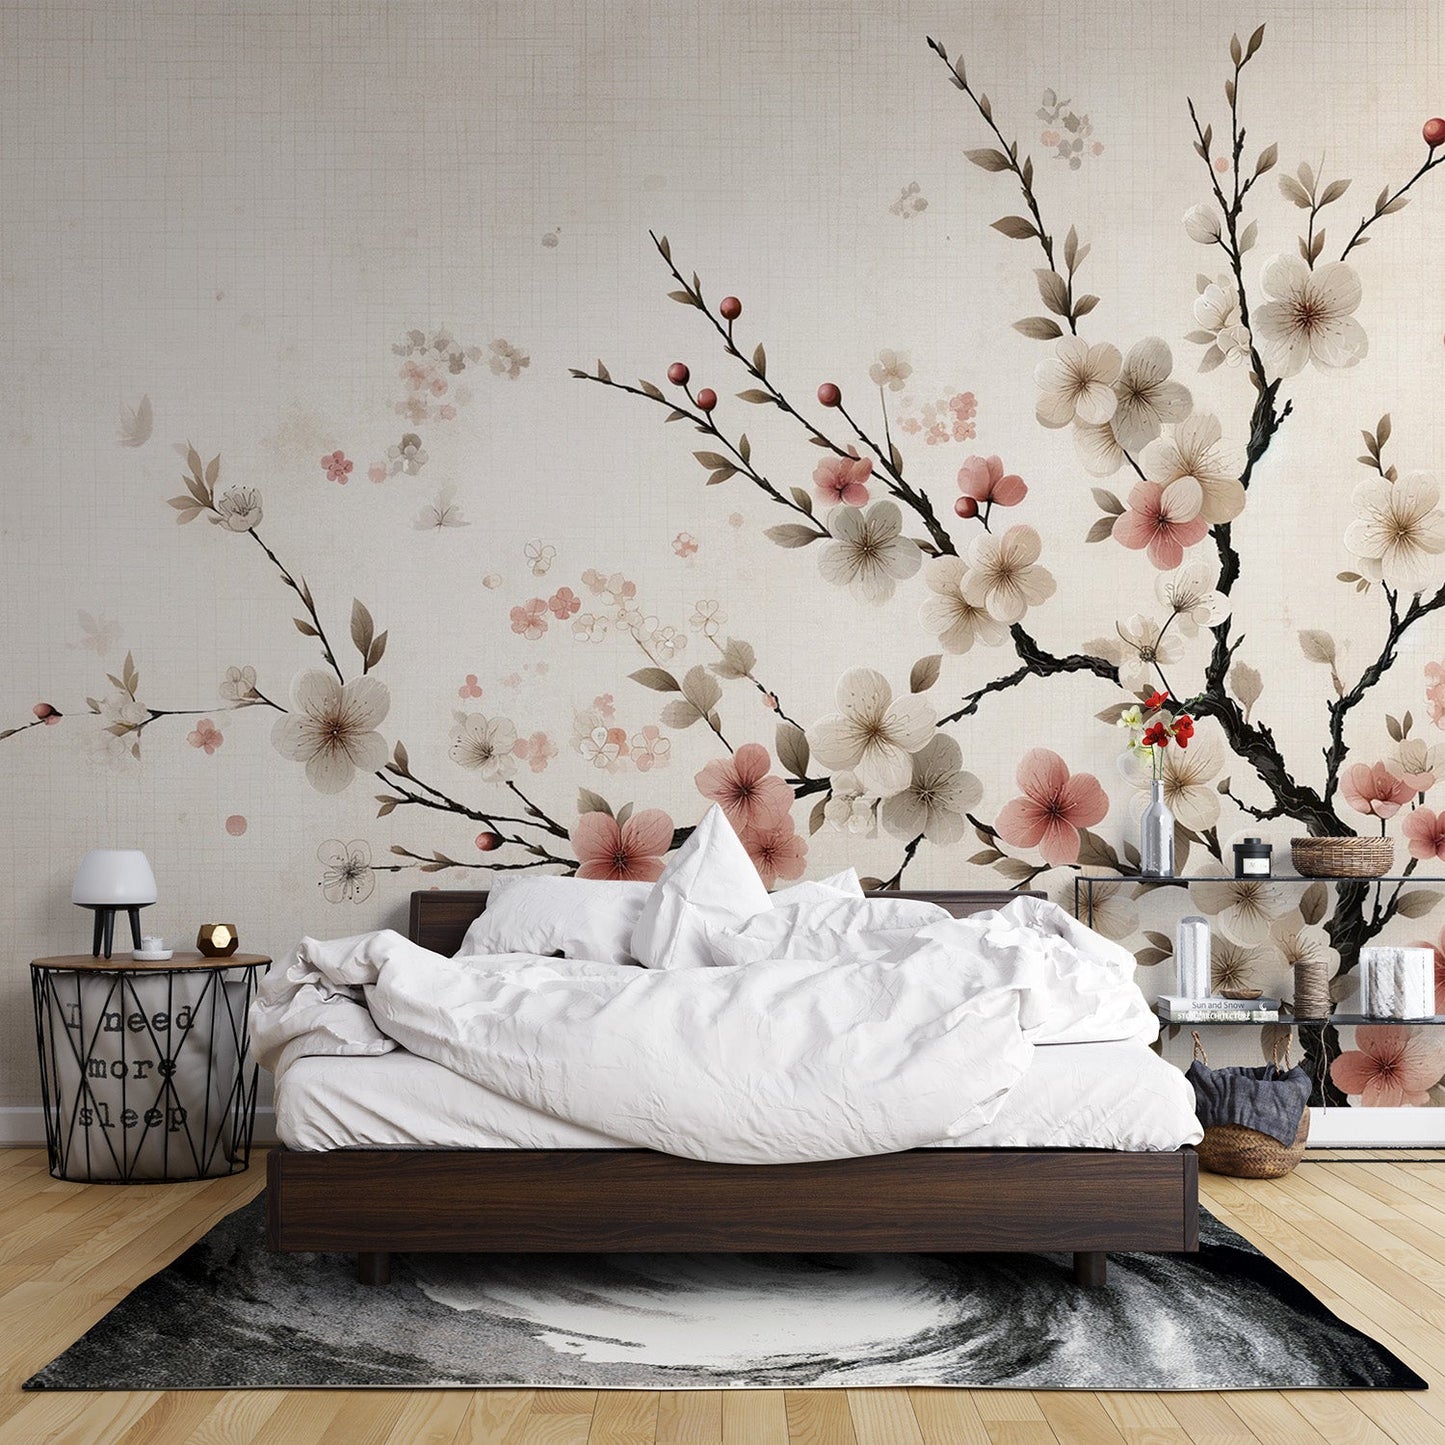 Japanese Wallpaper | Woven Background with White and Pink Sakura Flowers